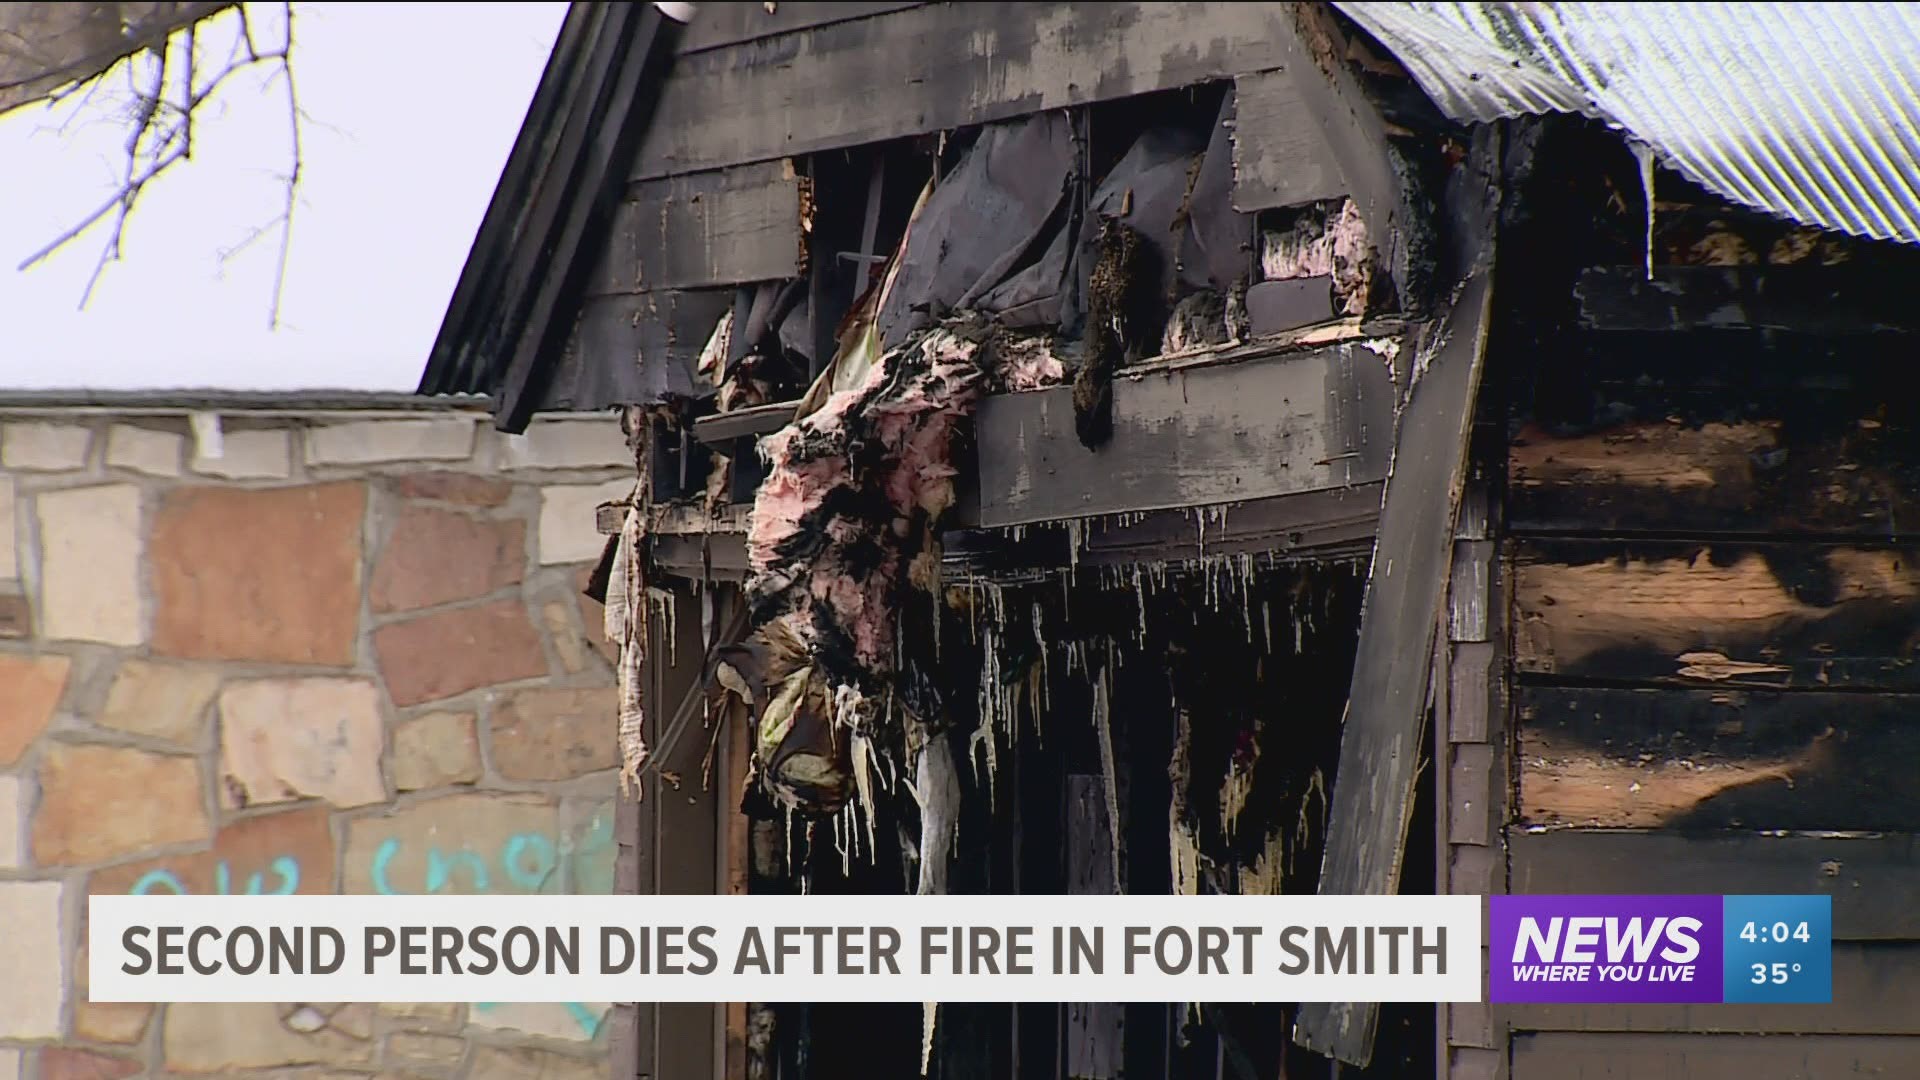 A woman died in the fire and a man later died from his injuries at the hospital.